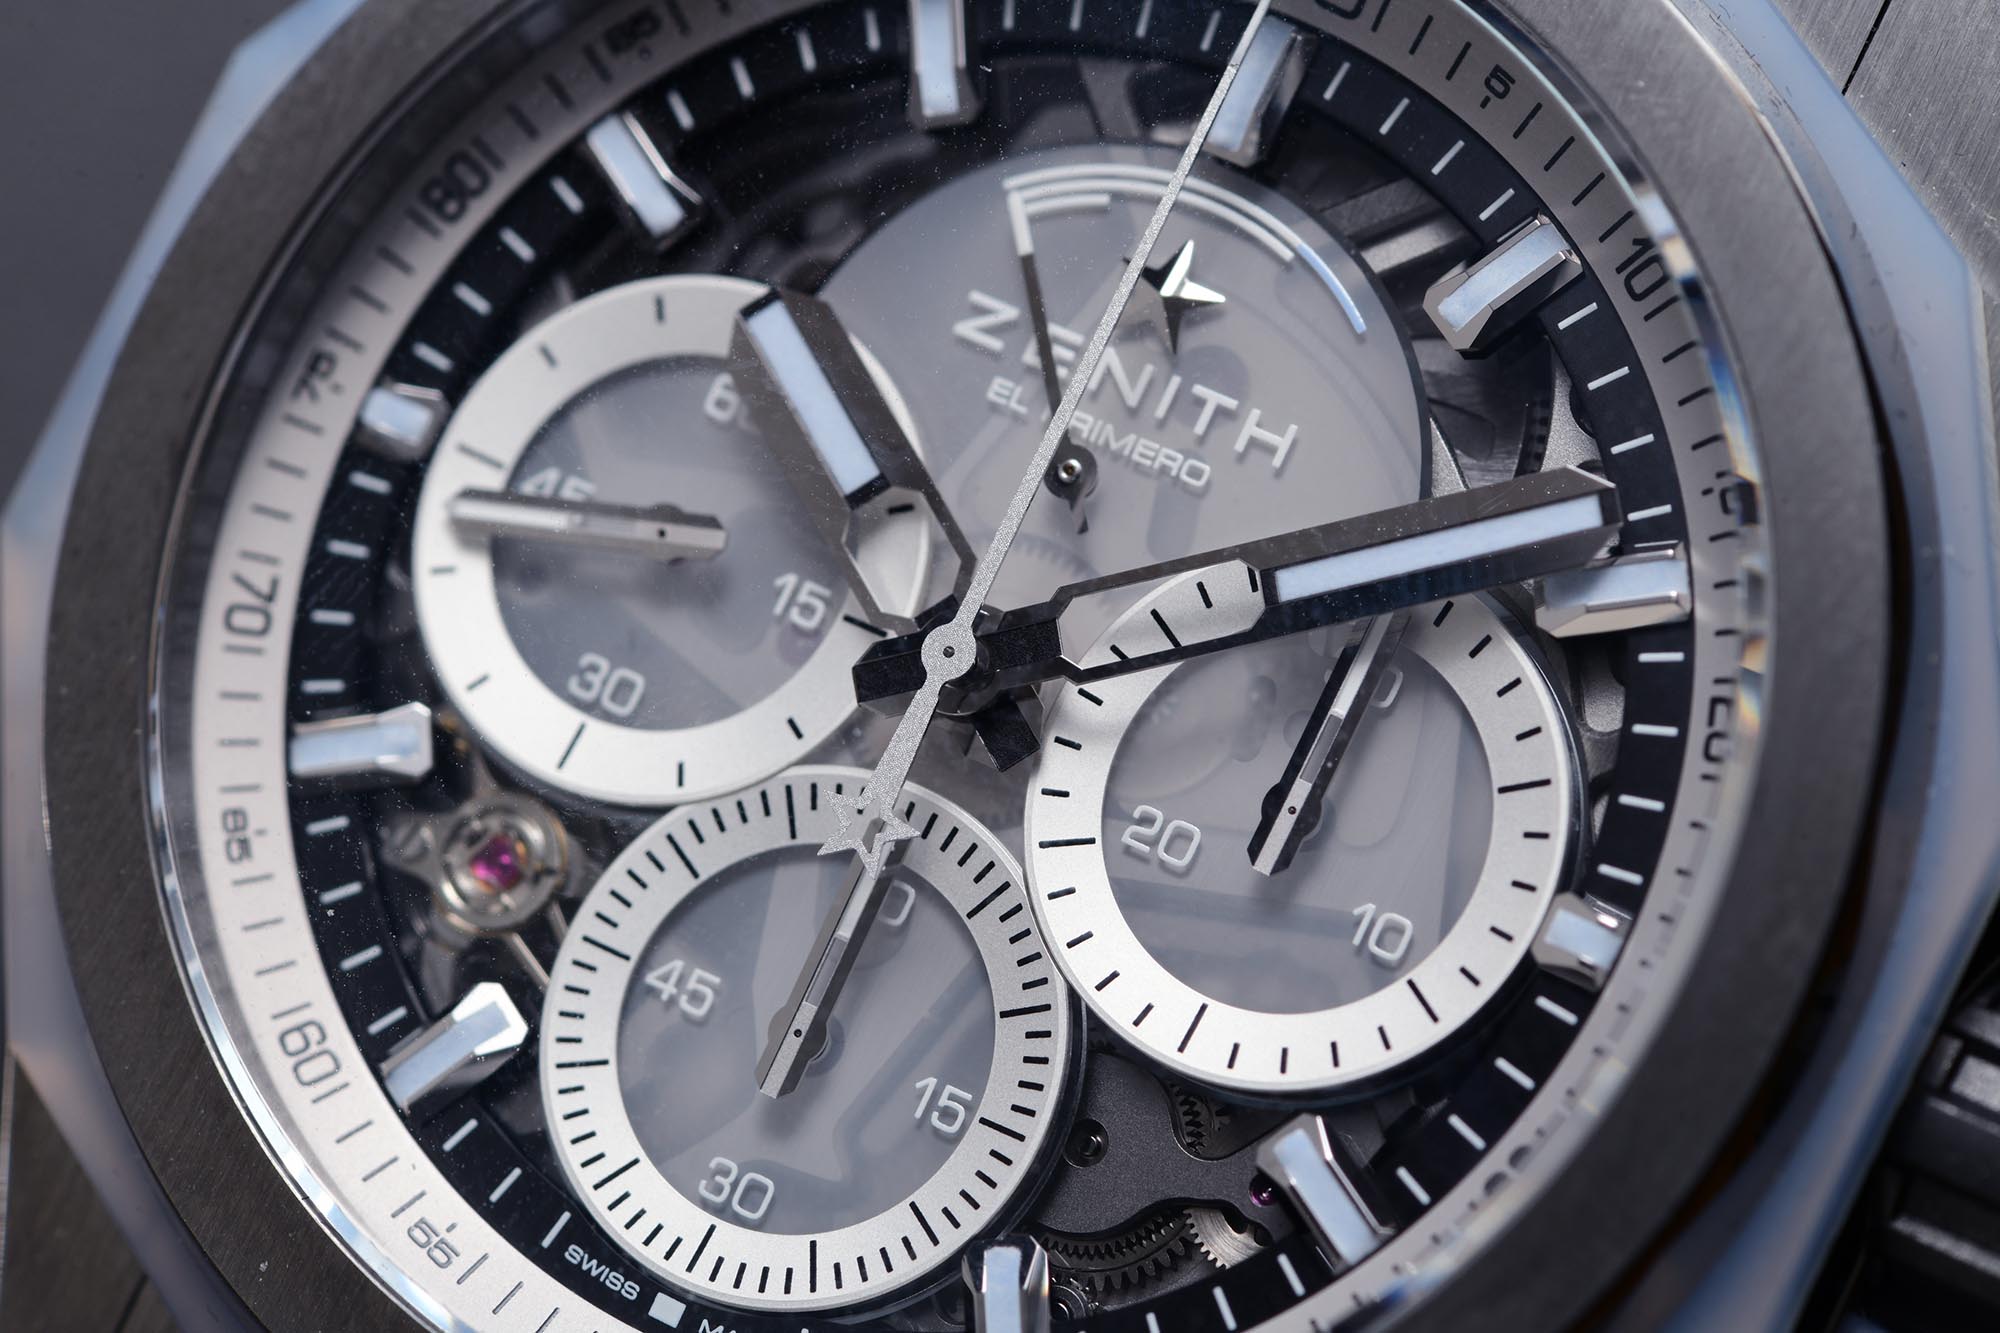 First Look: The Zenith Defy Revival A3691 at LVMH Watch Week 2023